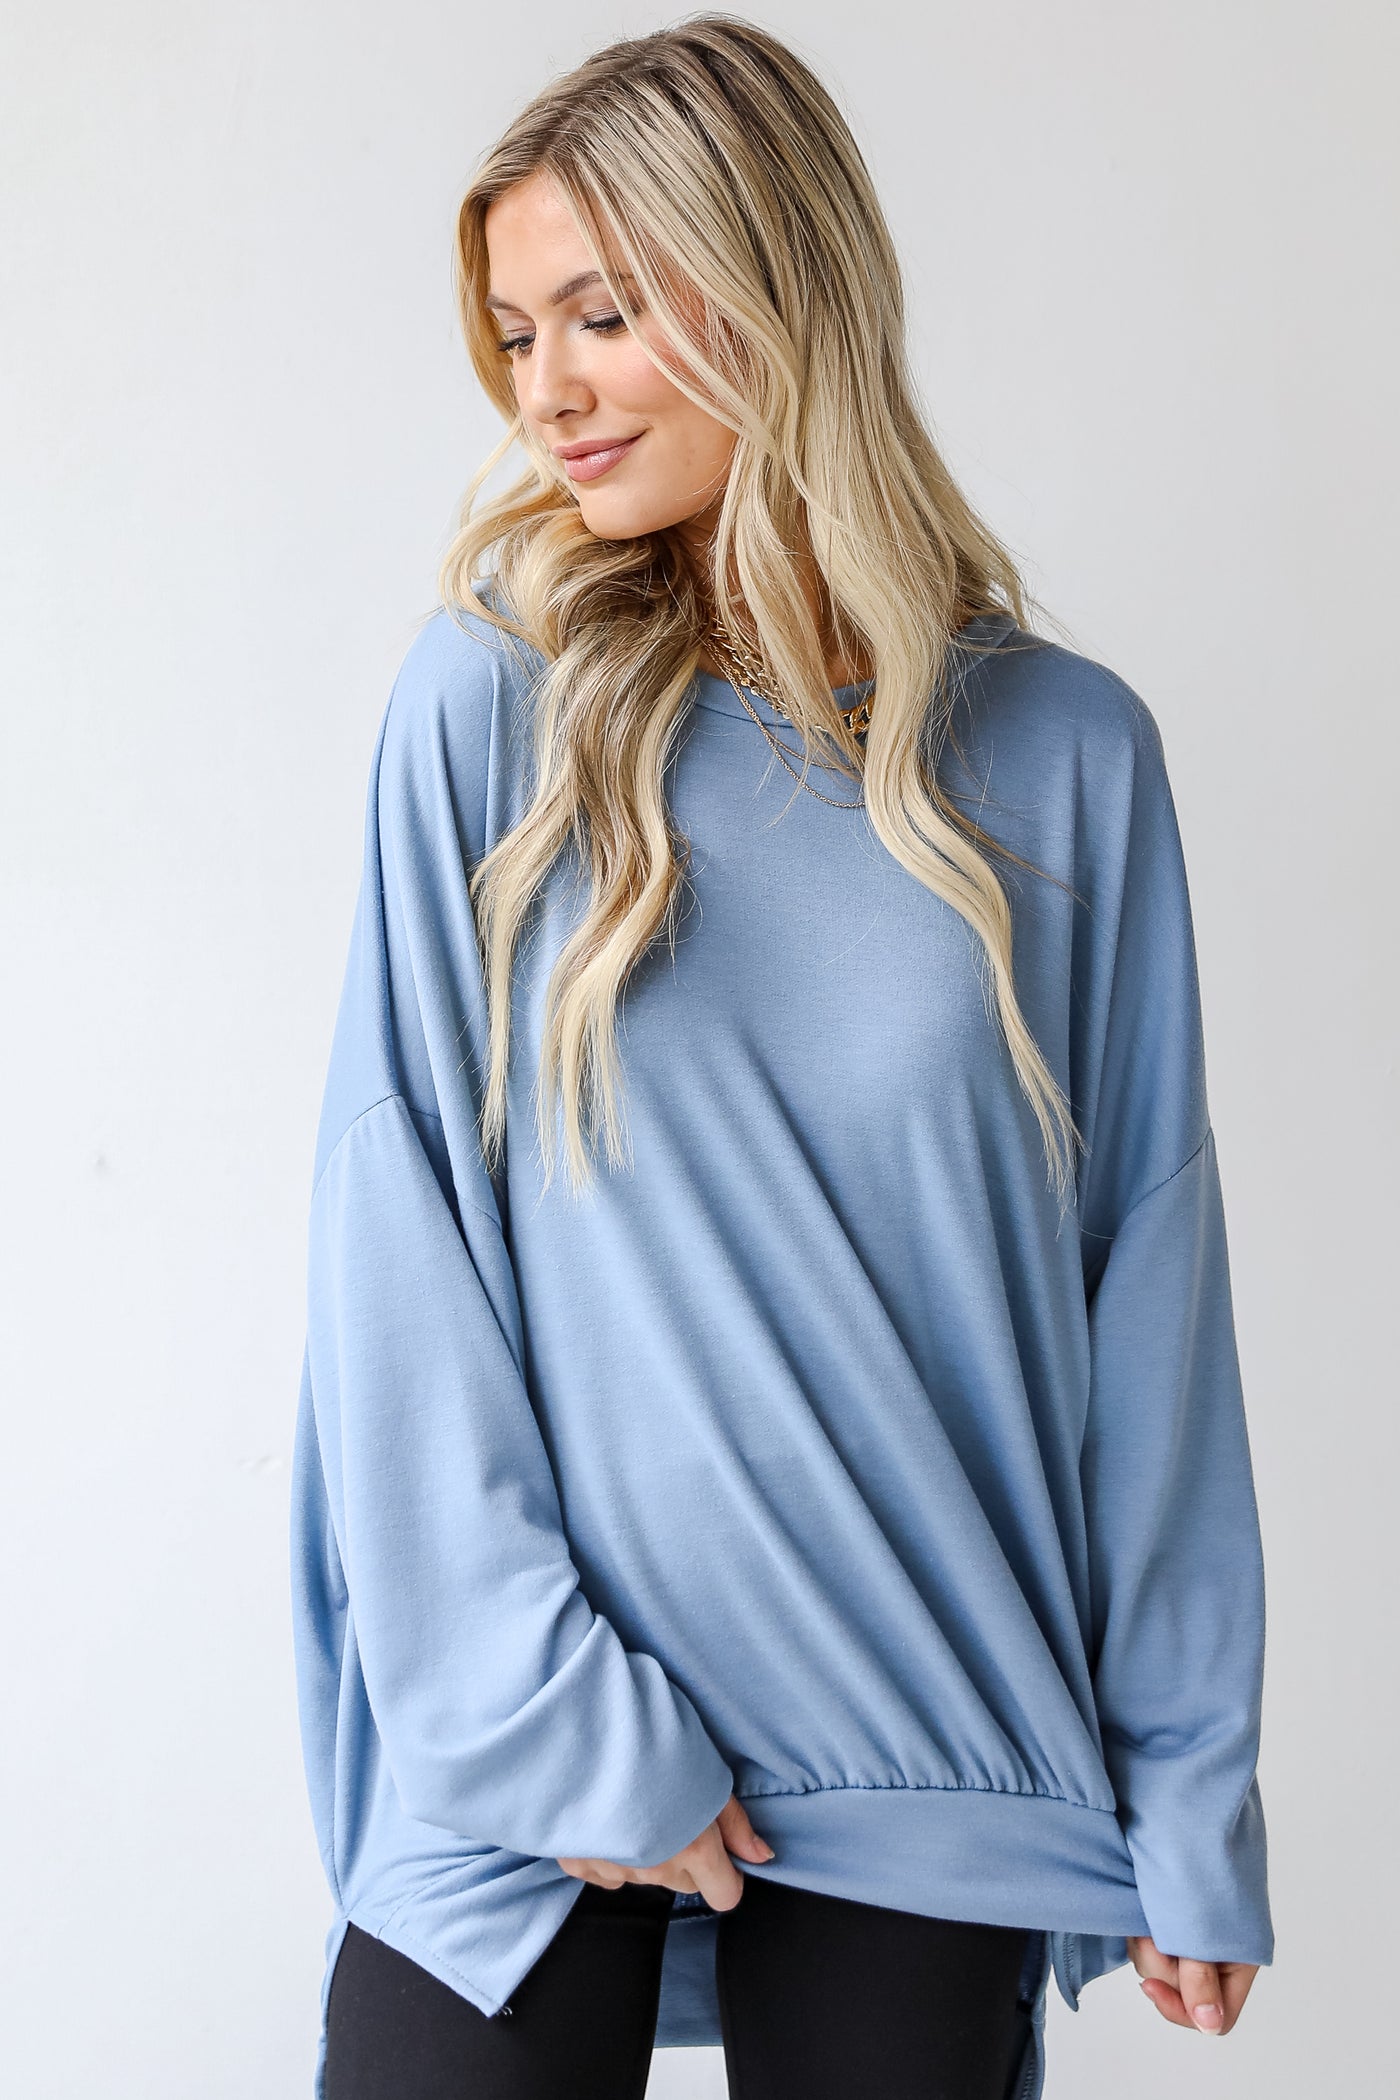 Oversized Pullover from dress up